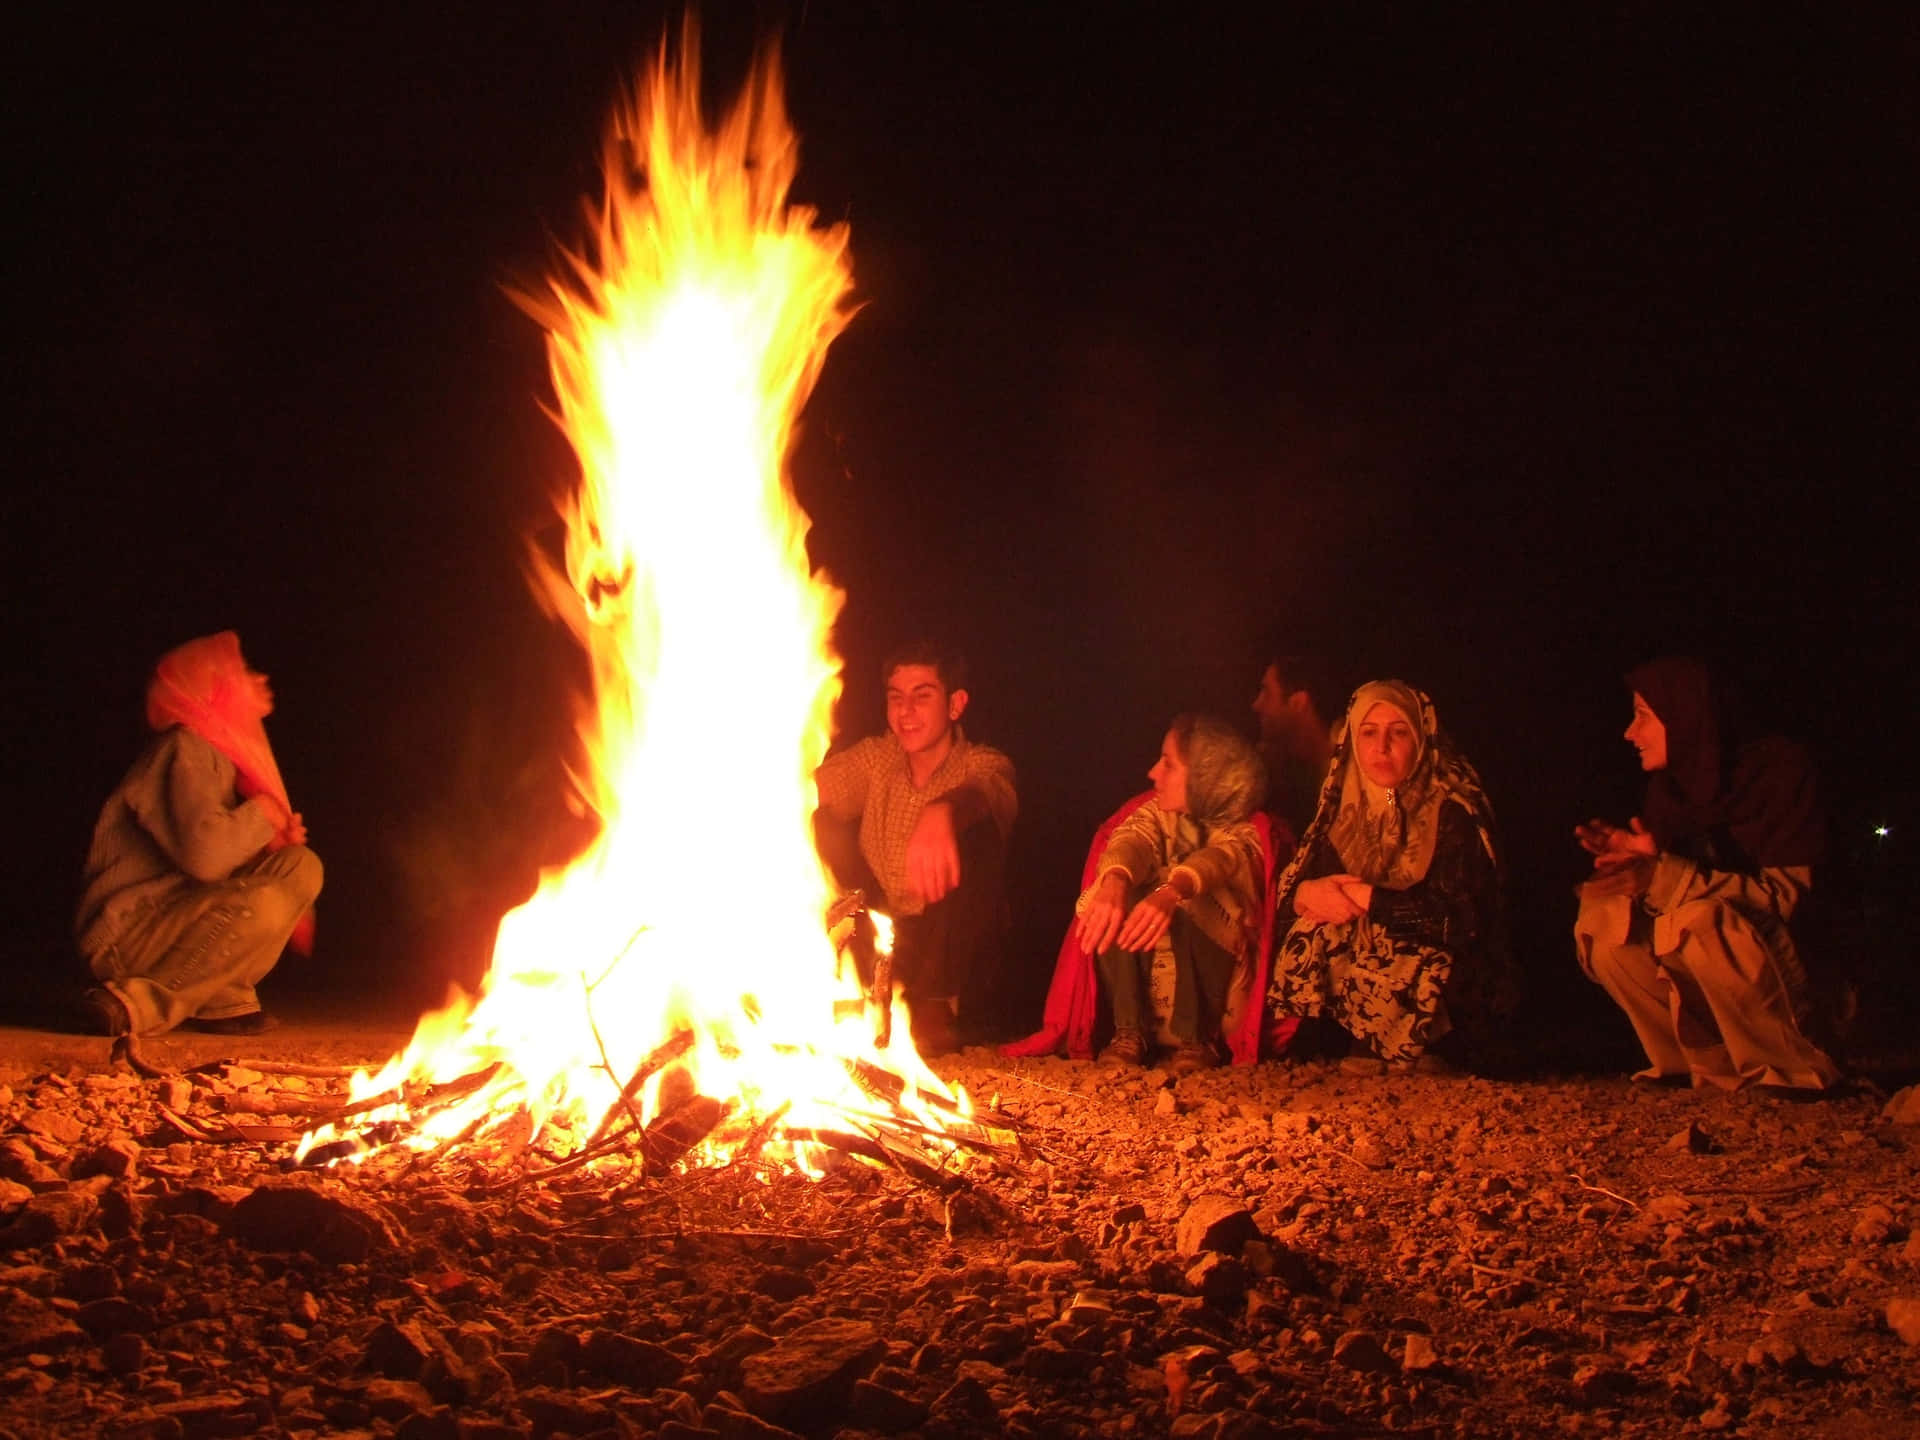 A cozy campfire surrounded by friends in the great outdoors